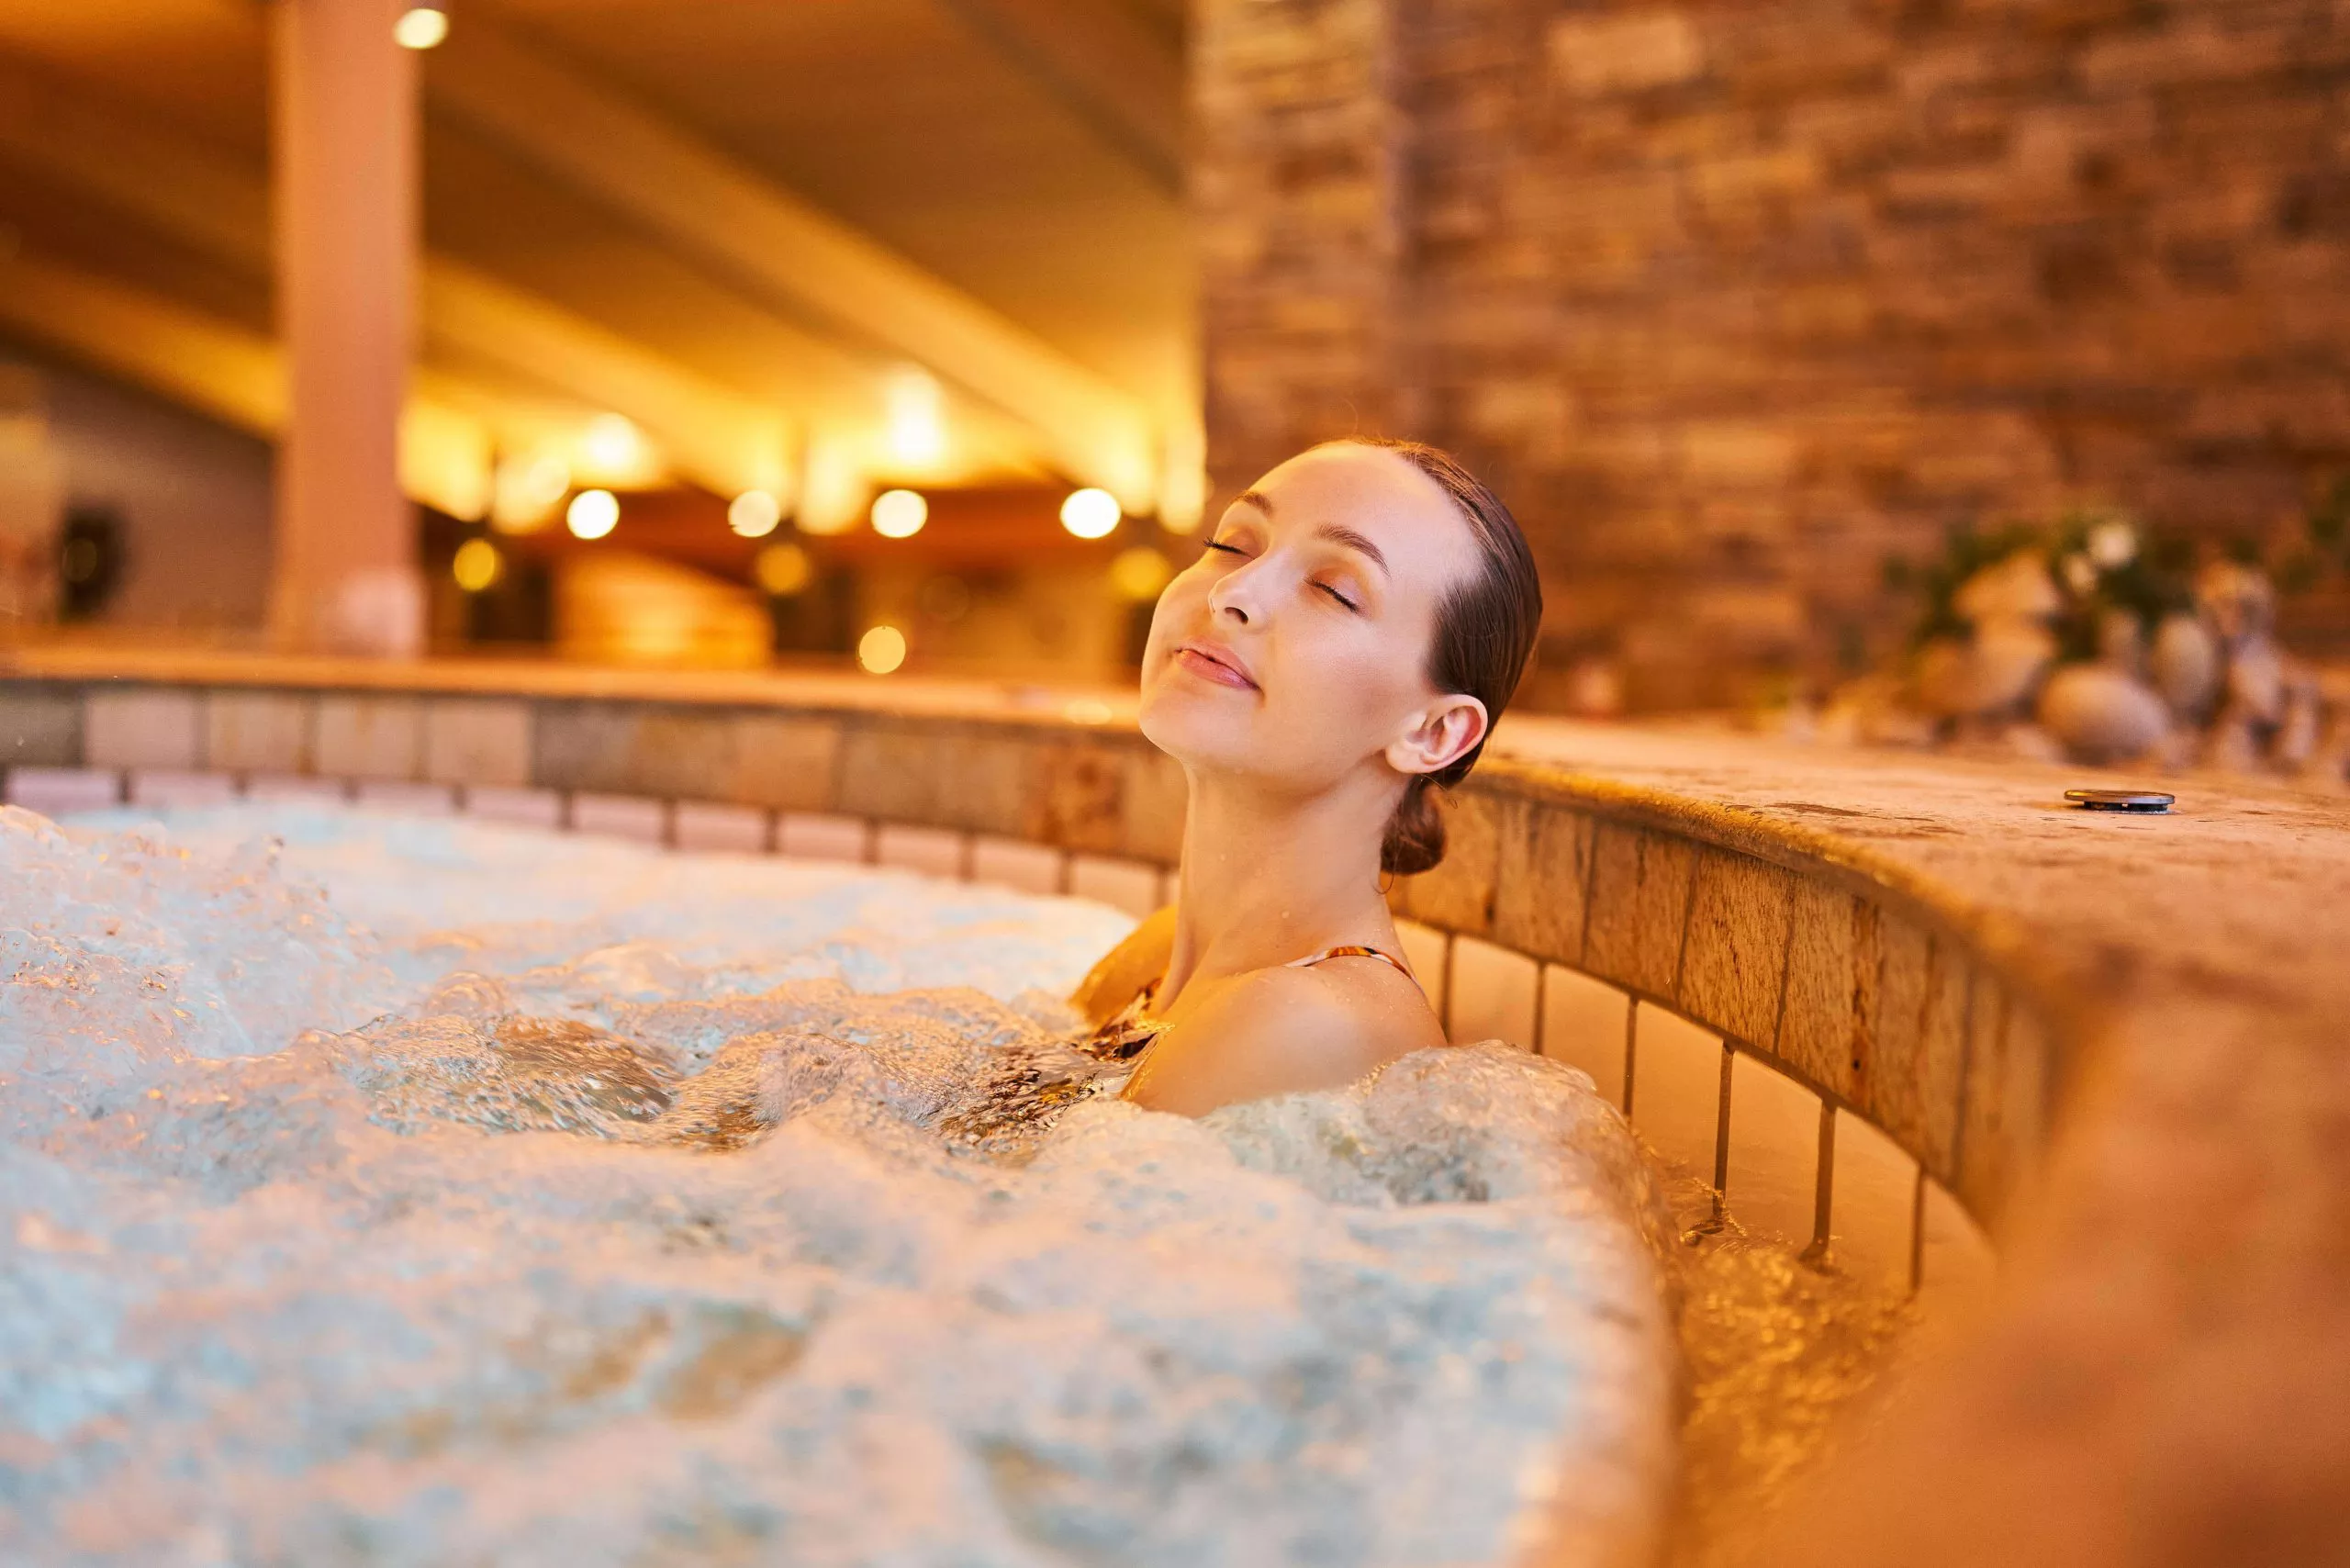 A relaxed young woman is resting in a bubbling jacuzzi-like pool, her eyes half-closed. The blurred background shows a stone wall and distant high ceiling supported by a column, lit with multiple lamps.